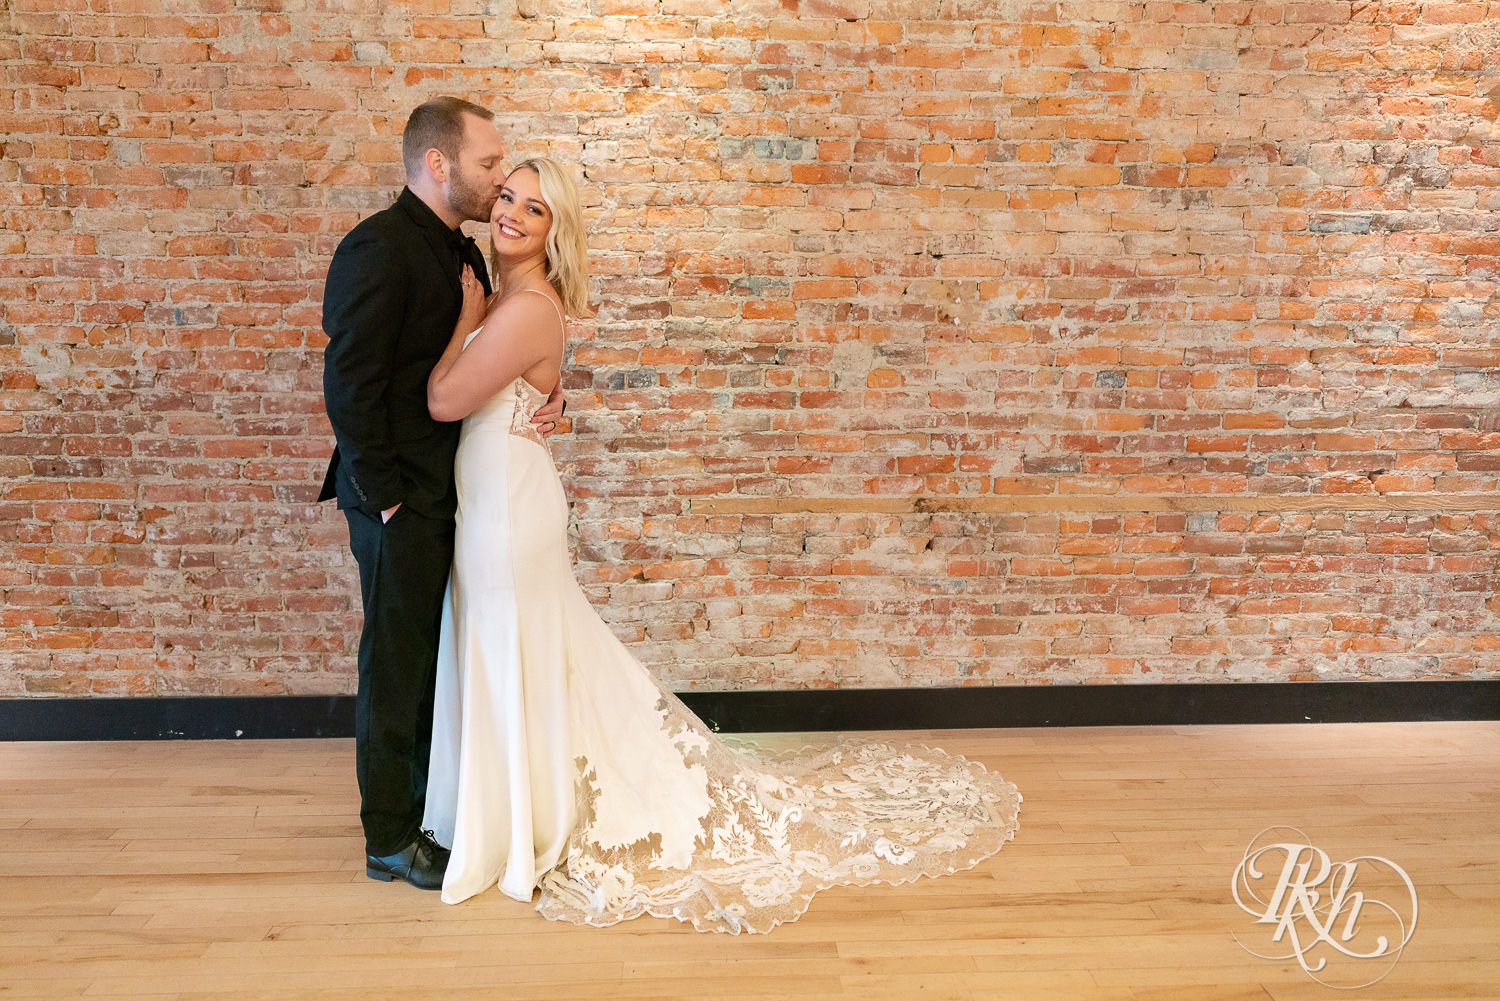 Bride and groom kissing in front of brick wall in 3 Ten Event Venue in Faribault, Minnesota.